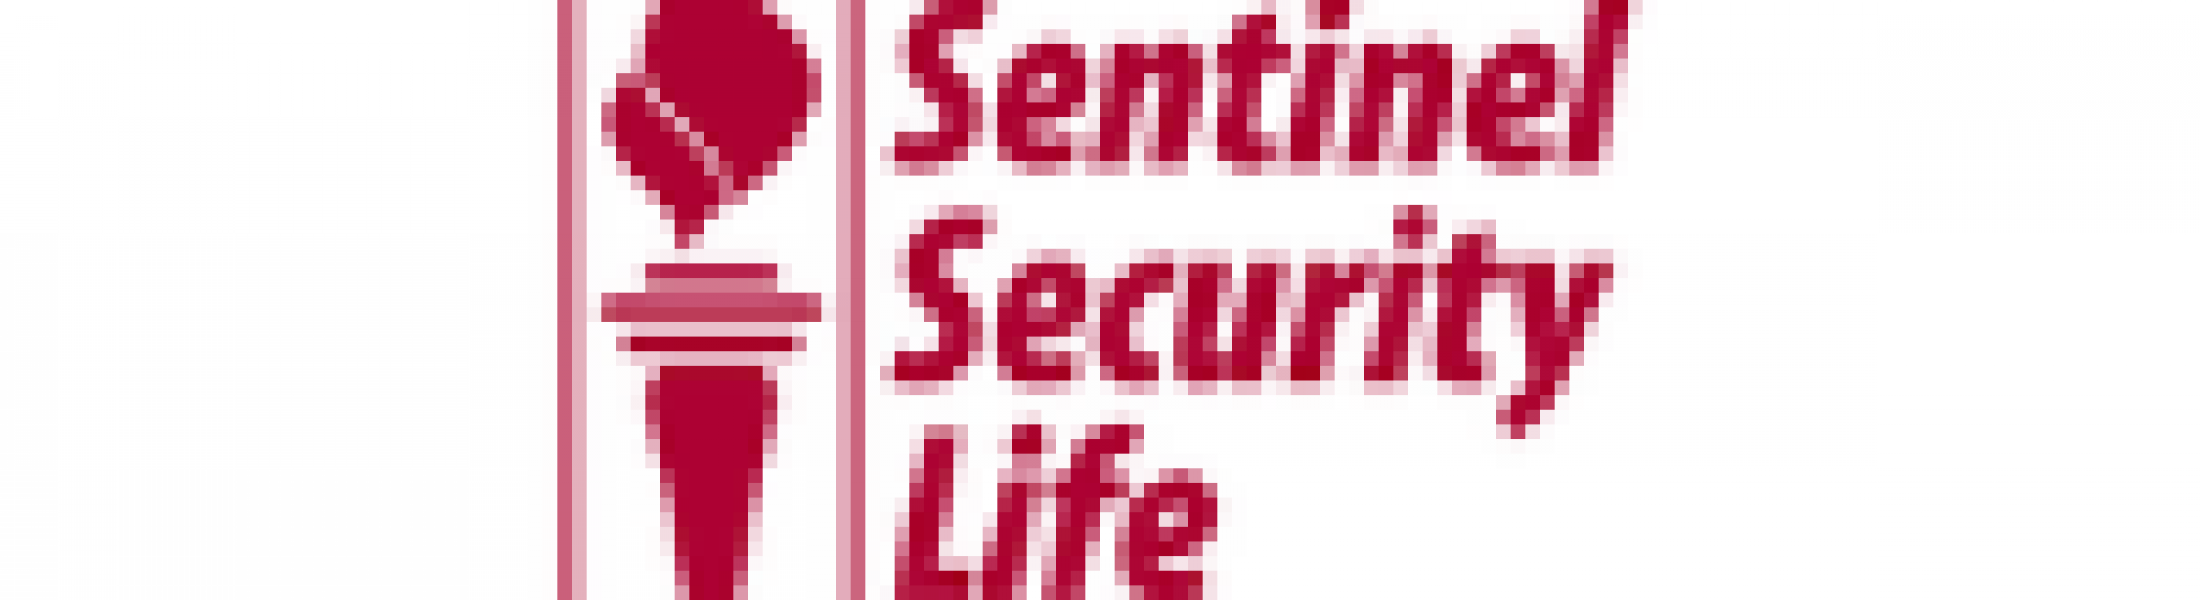 sentinel security life annuity forms